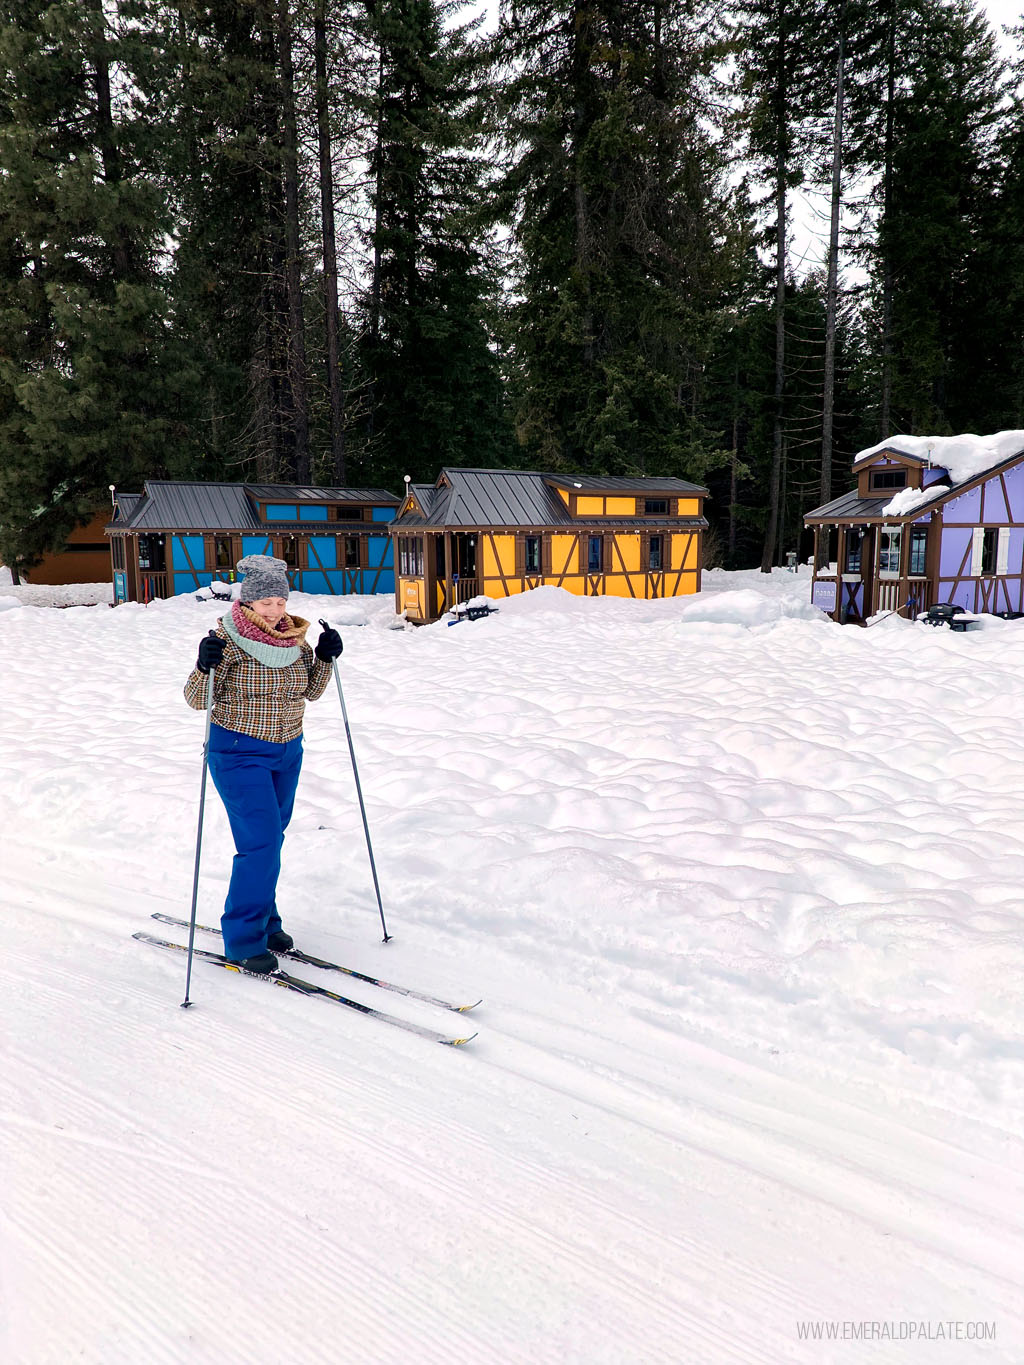 The Best Cross Country Skiing in Washington